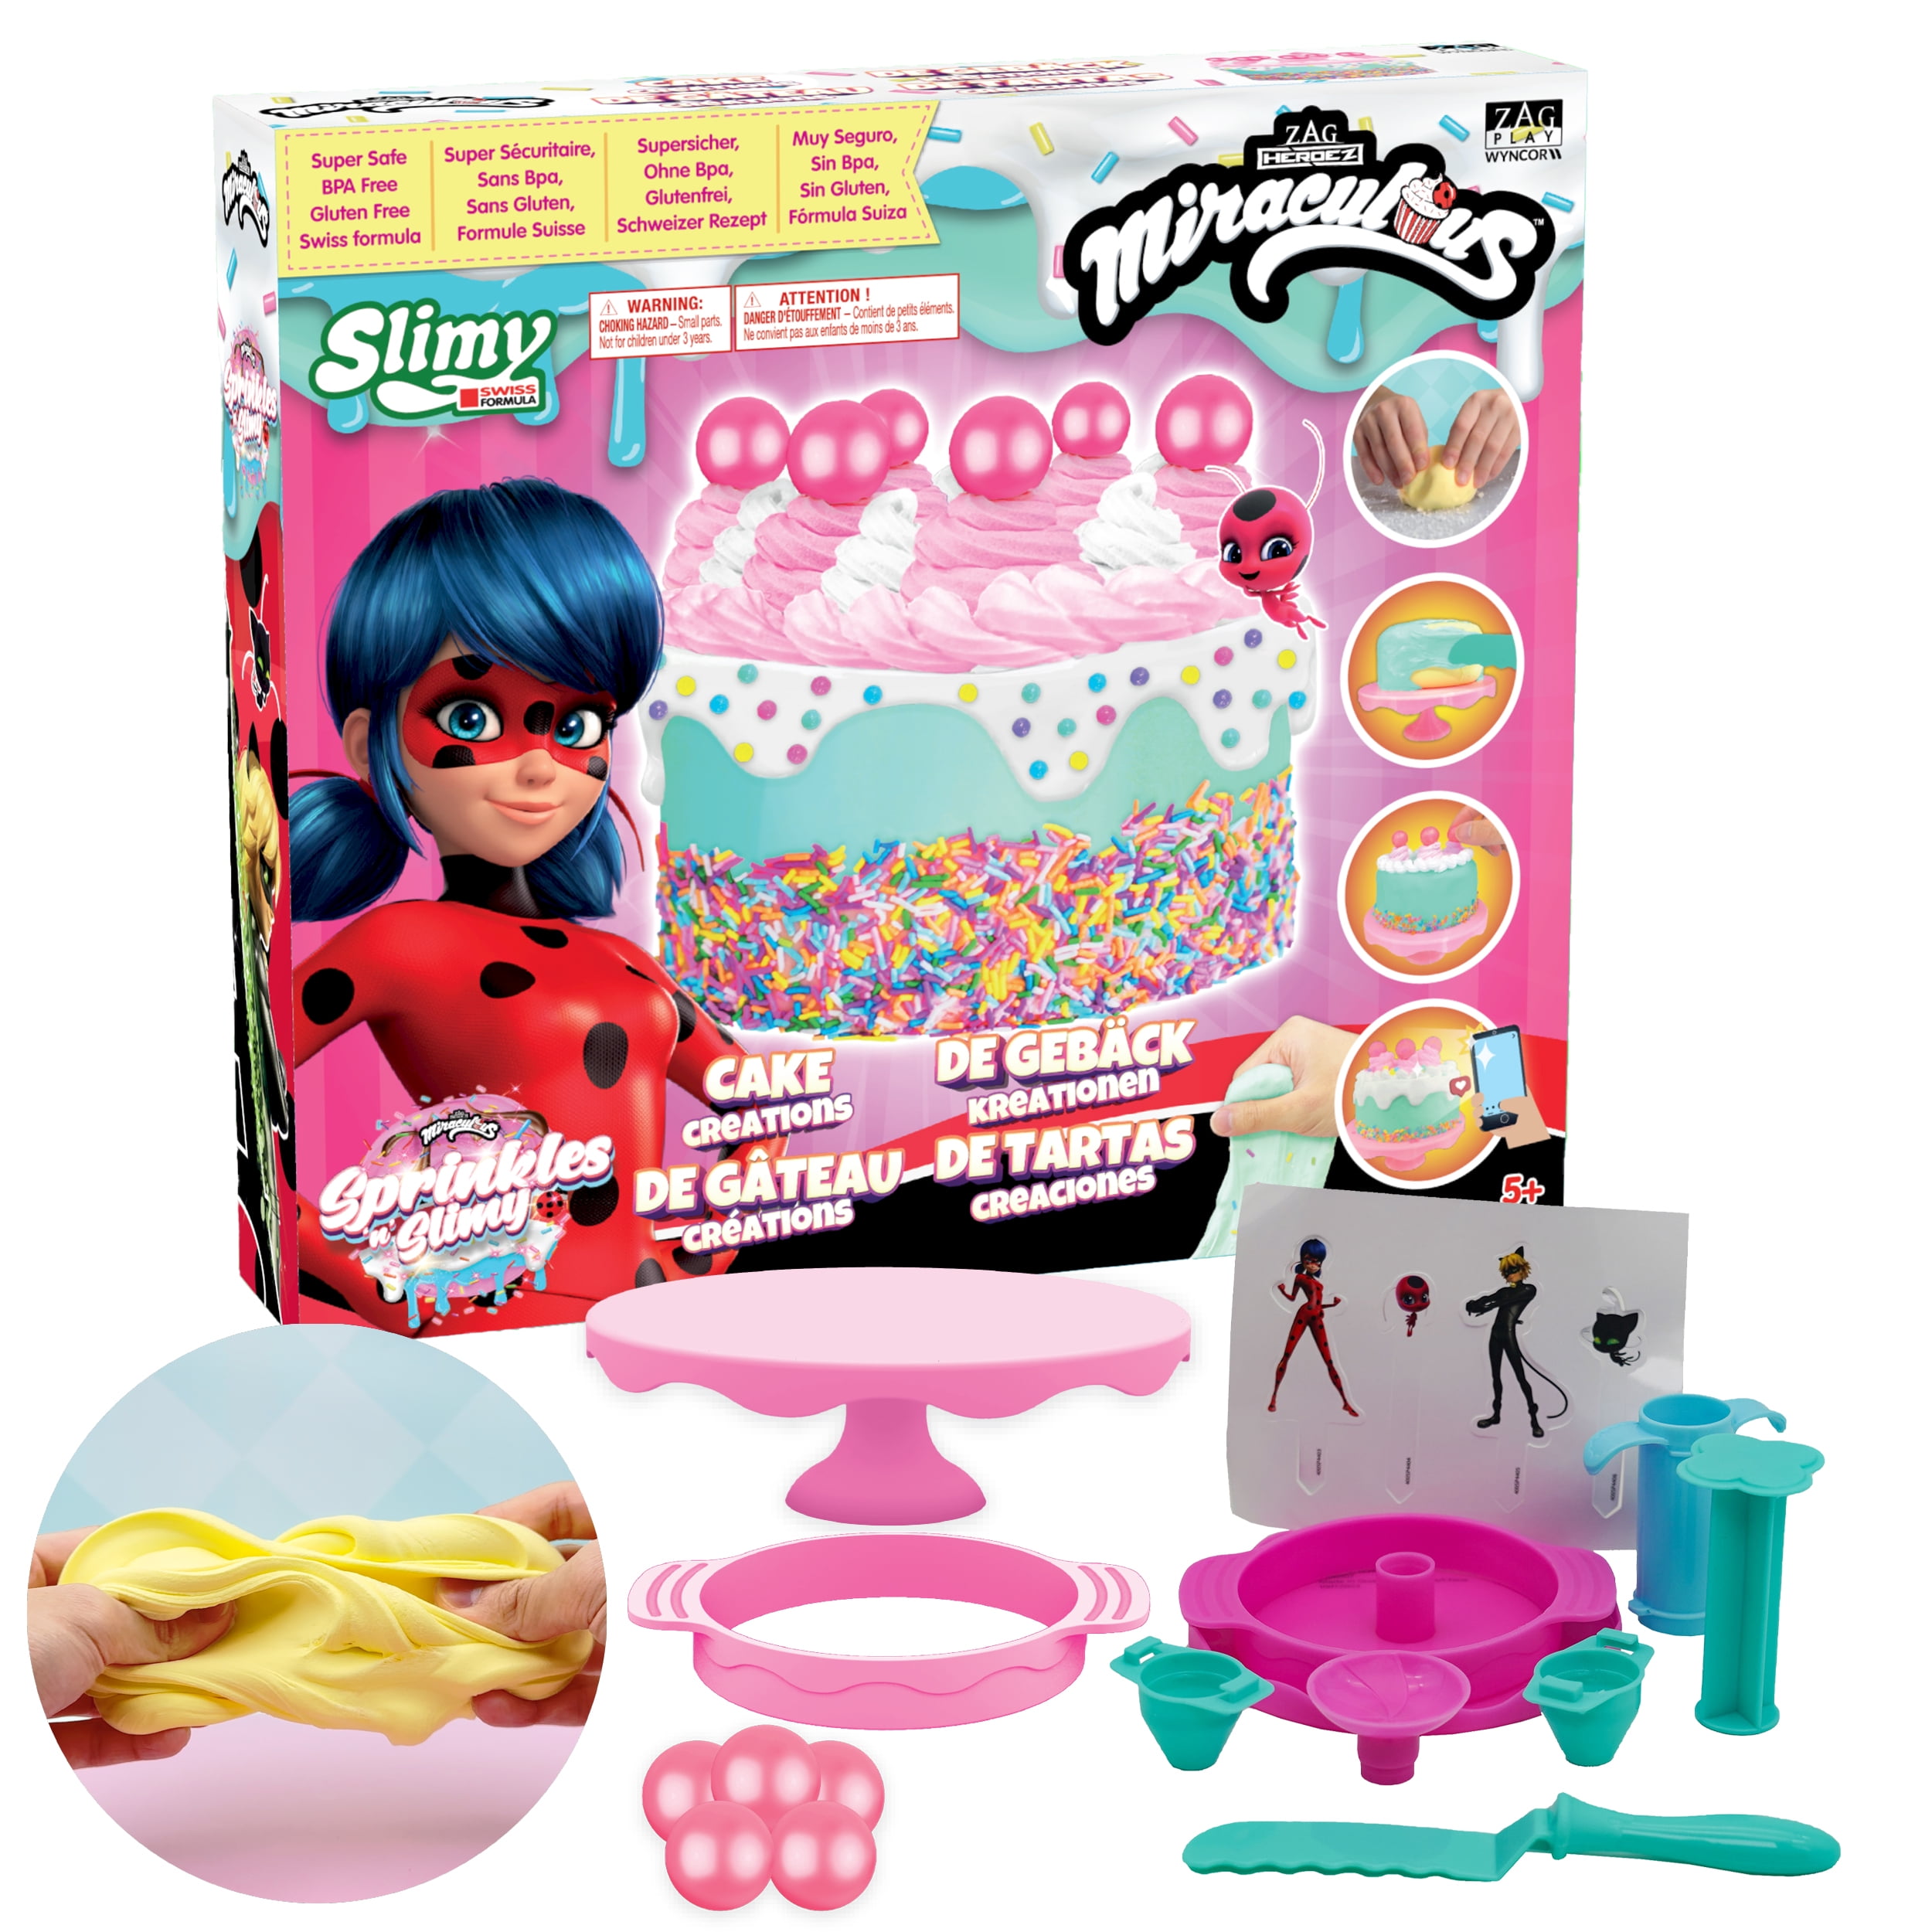 Miraculous Ladybug - Sprinkles n' Slimy Birthday Cake Creations - Slime Kit  for Girls and Boys, Role Play Toys for Kids with Cake Stand, Light Clay,  Toppings, Decorations and Cooking Tools, Wyncor 